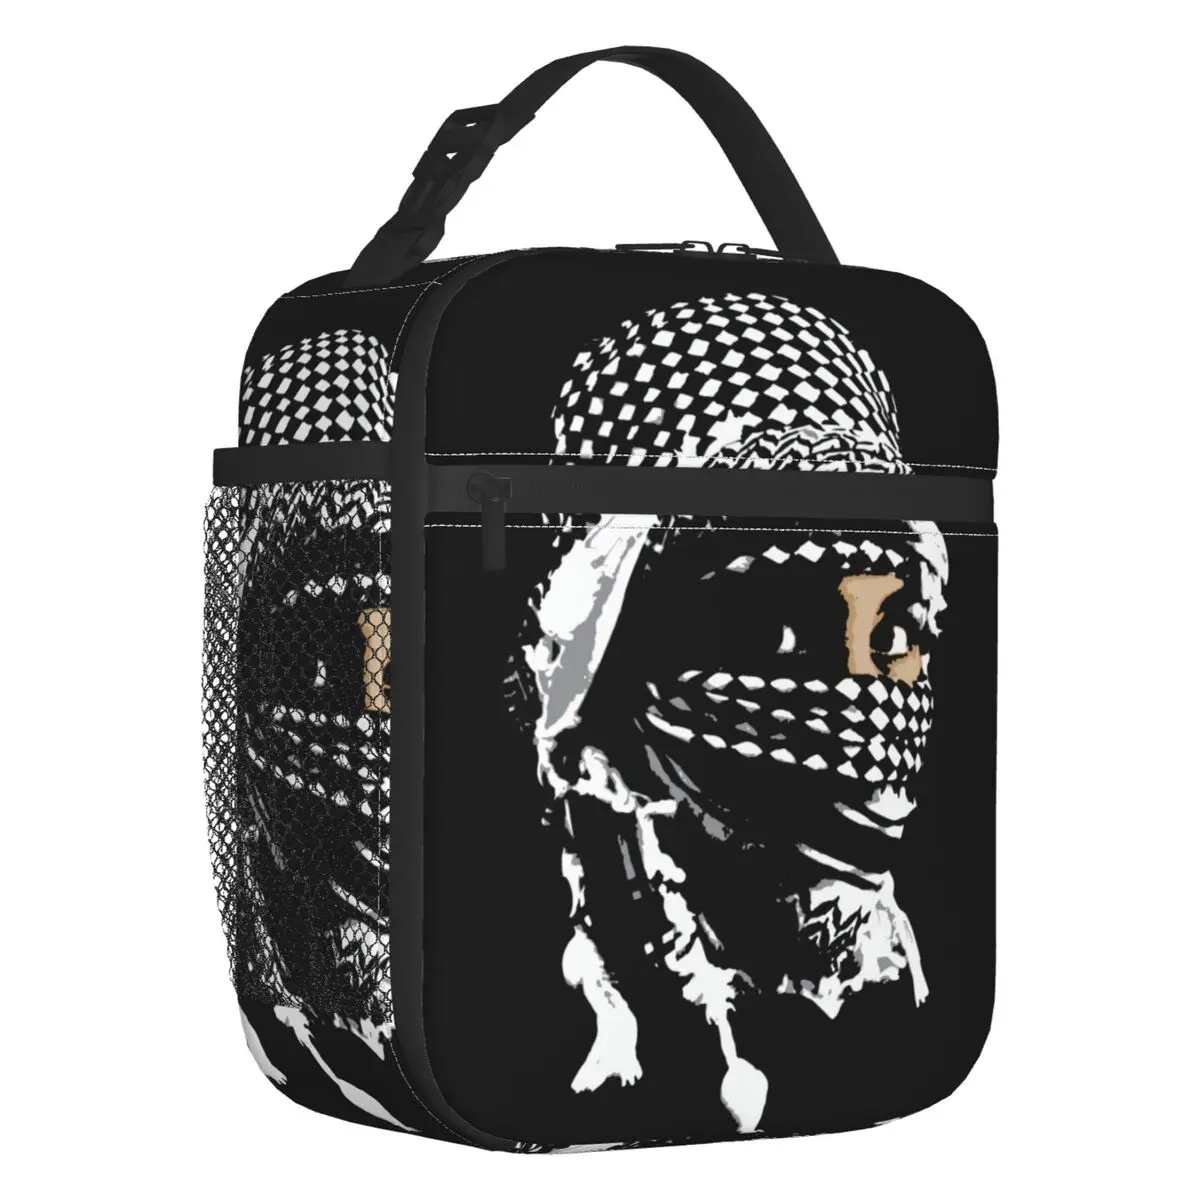 

Palestine Intifada Insulated Lunch Tote Bag for Women Save Palestinian Portable Thermal Cooler Bento Box Work School Travel